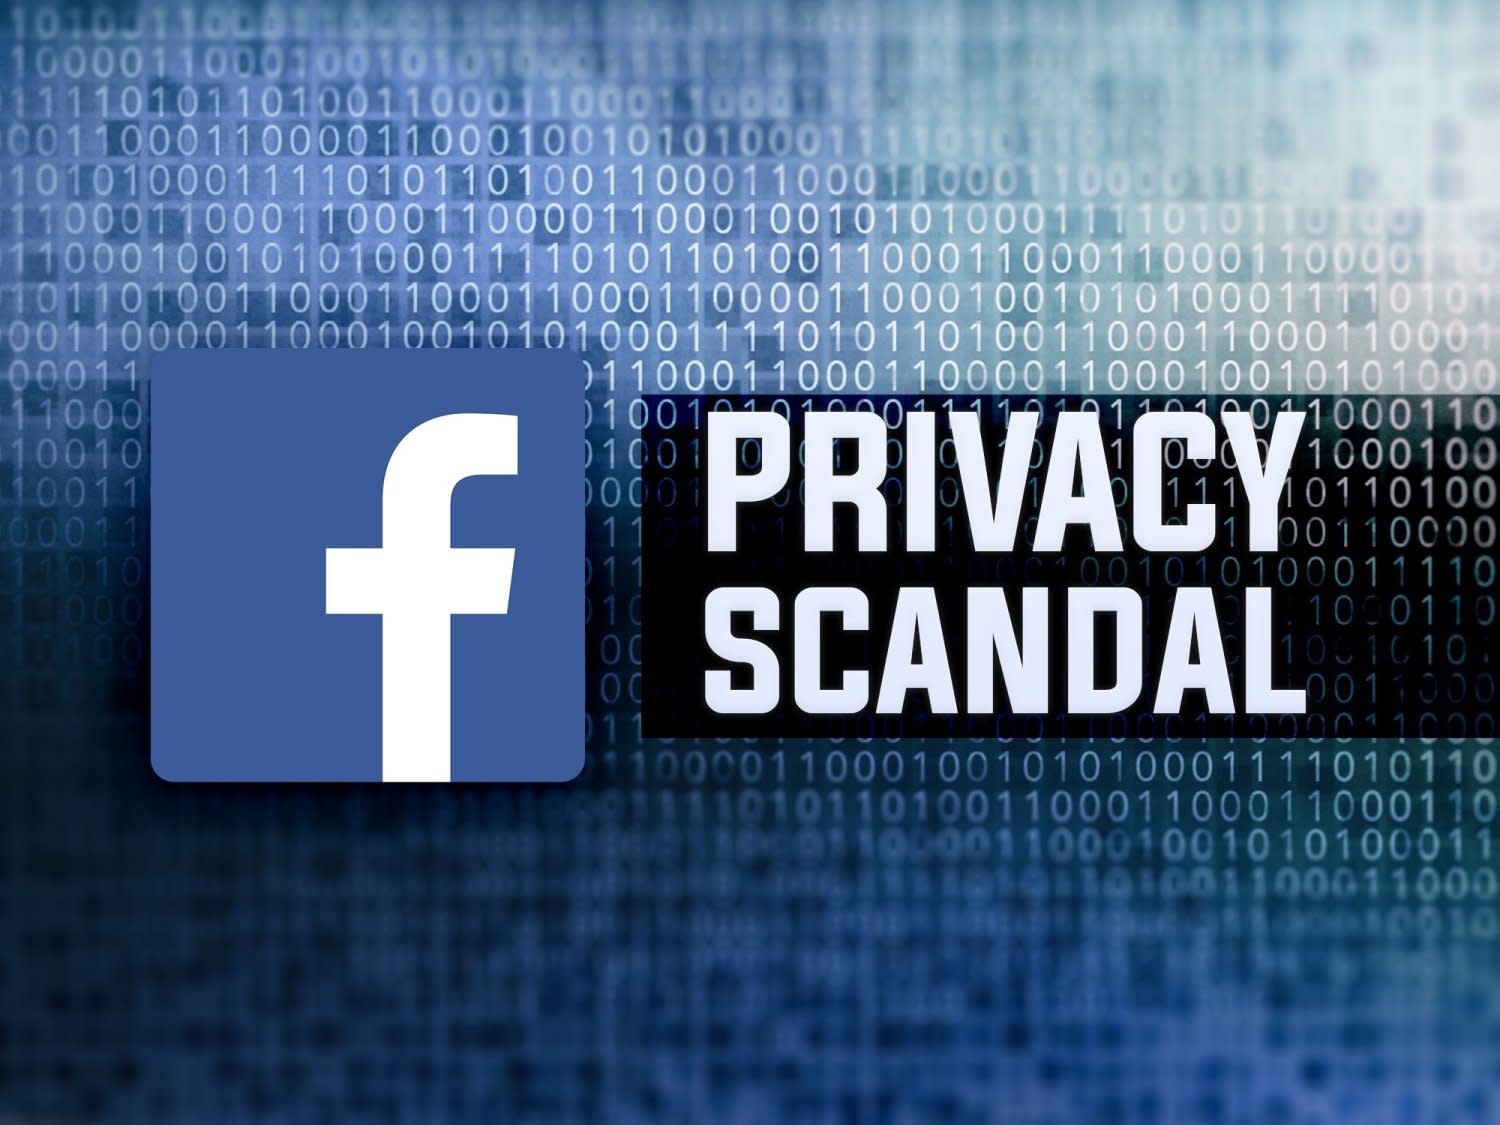 The latest Facebook scandal should compel apps to be more transparent: analysts